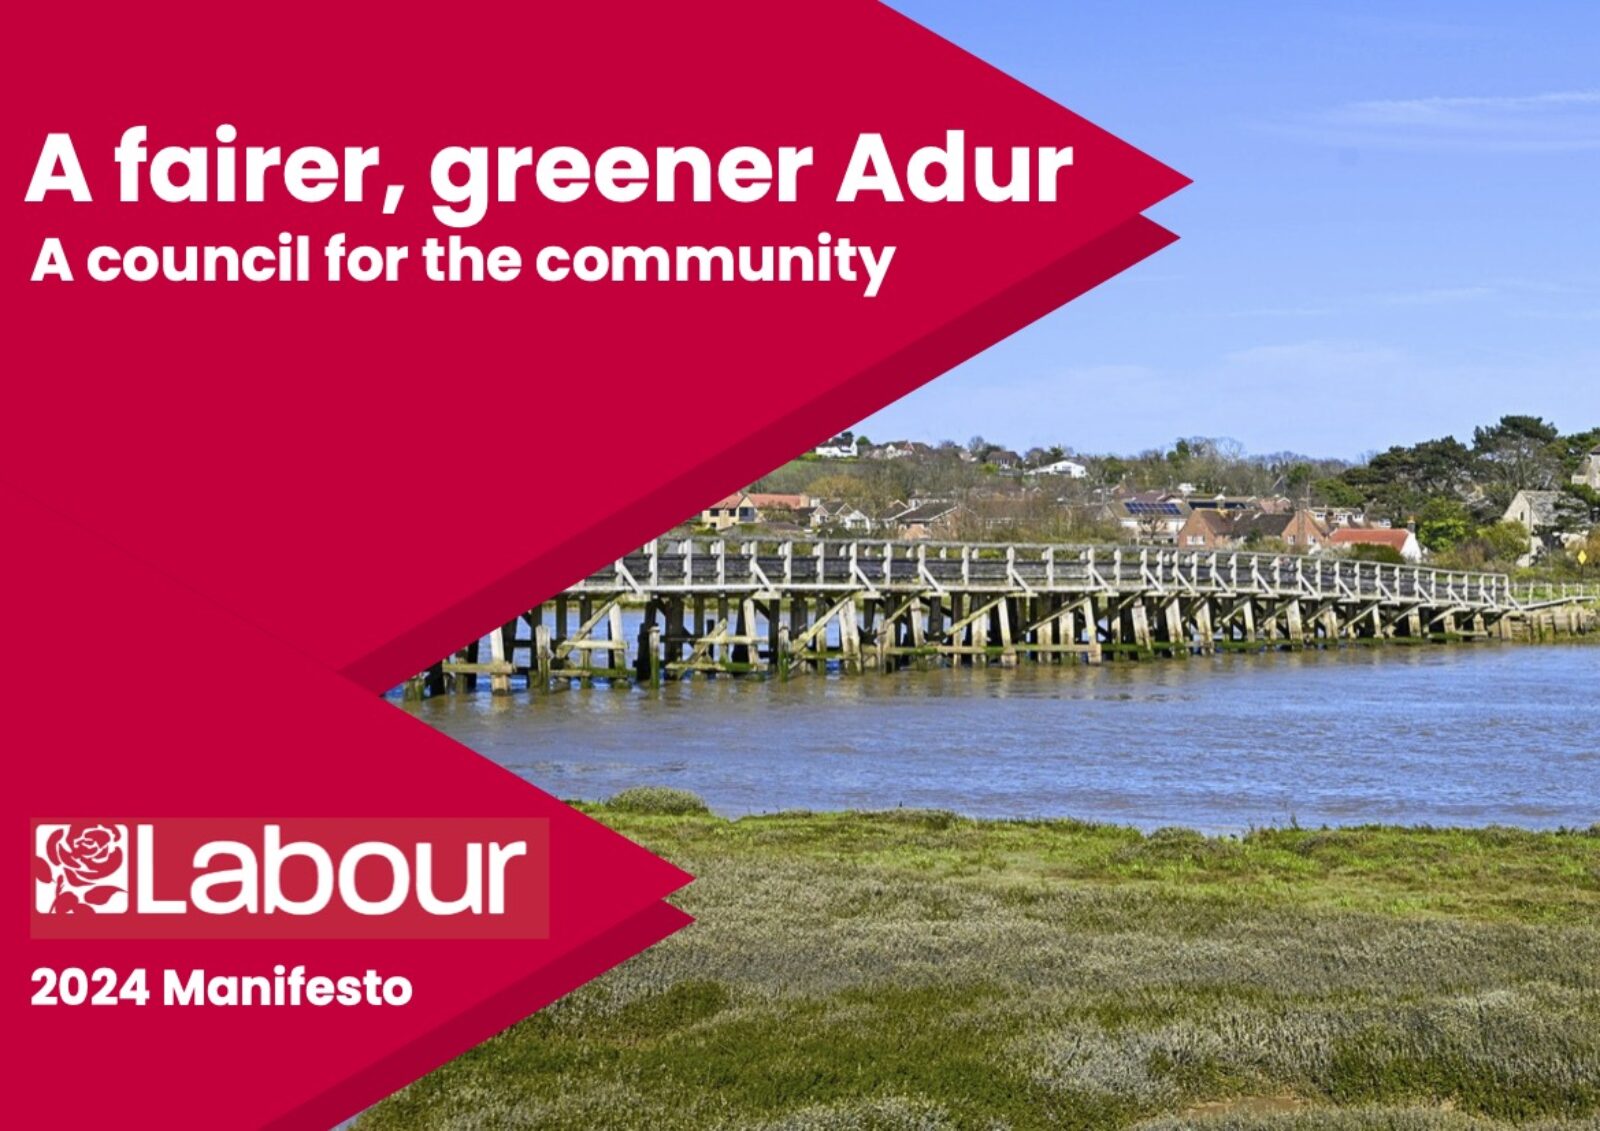 The cover of the Adur Labour manifesto 